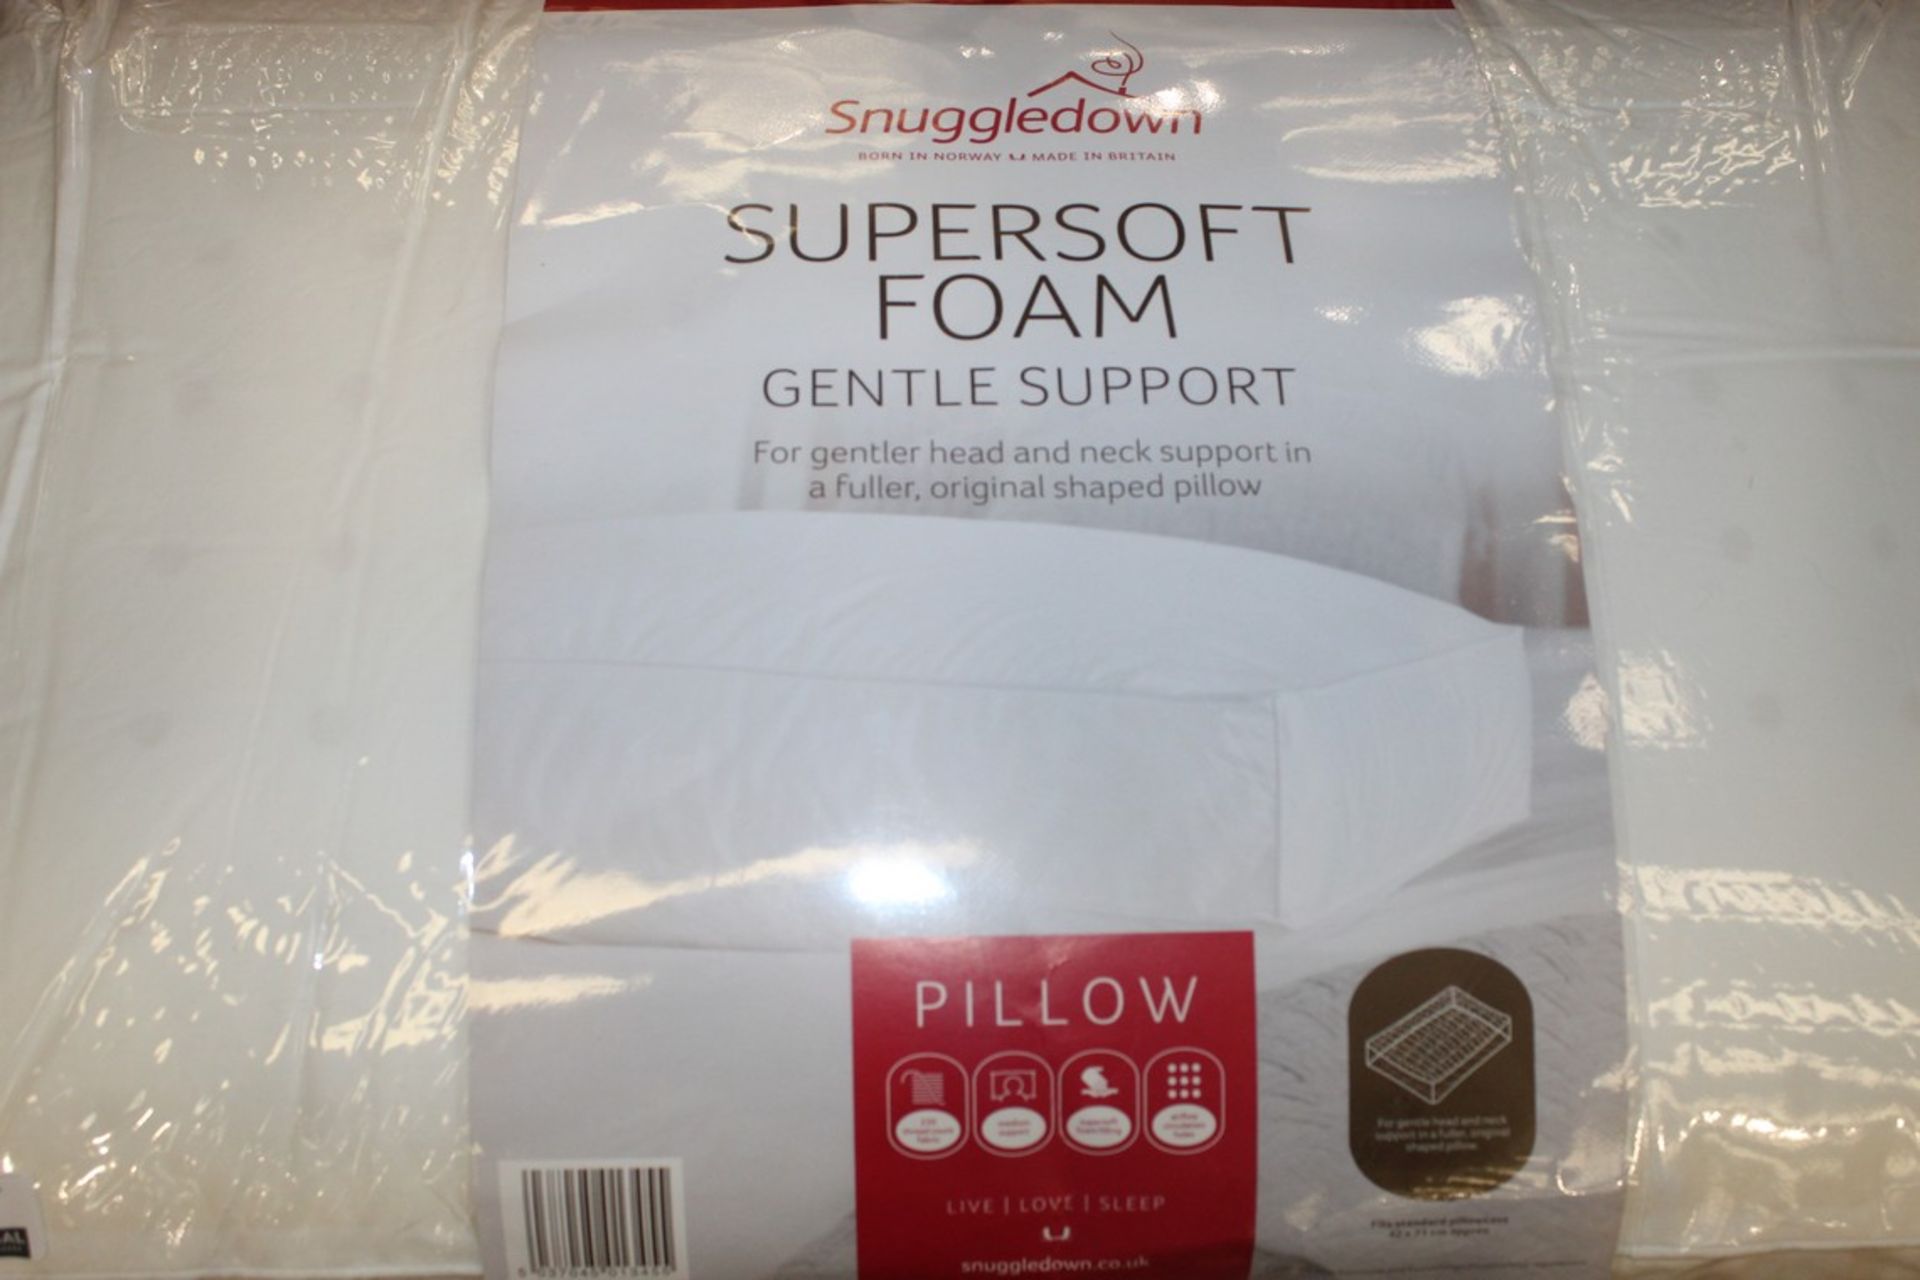 Snuggle Down Super Soft Foam Gentle Support Original Shaped Pillow RRP £60 (16406) (Pictures Are For